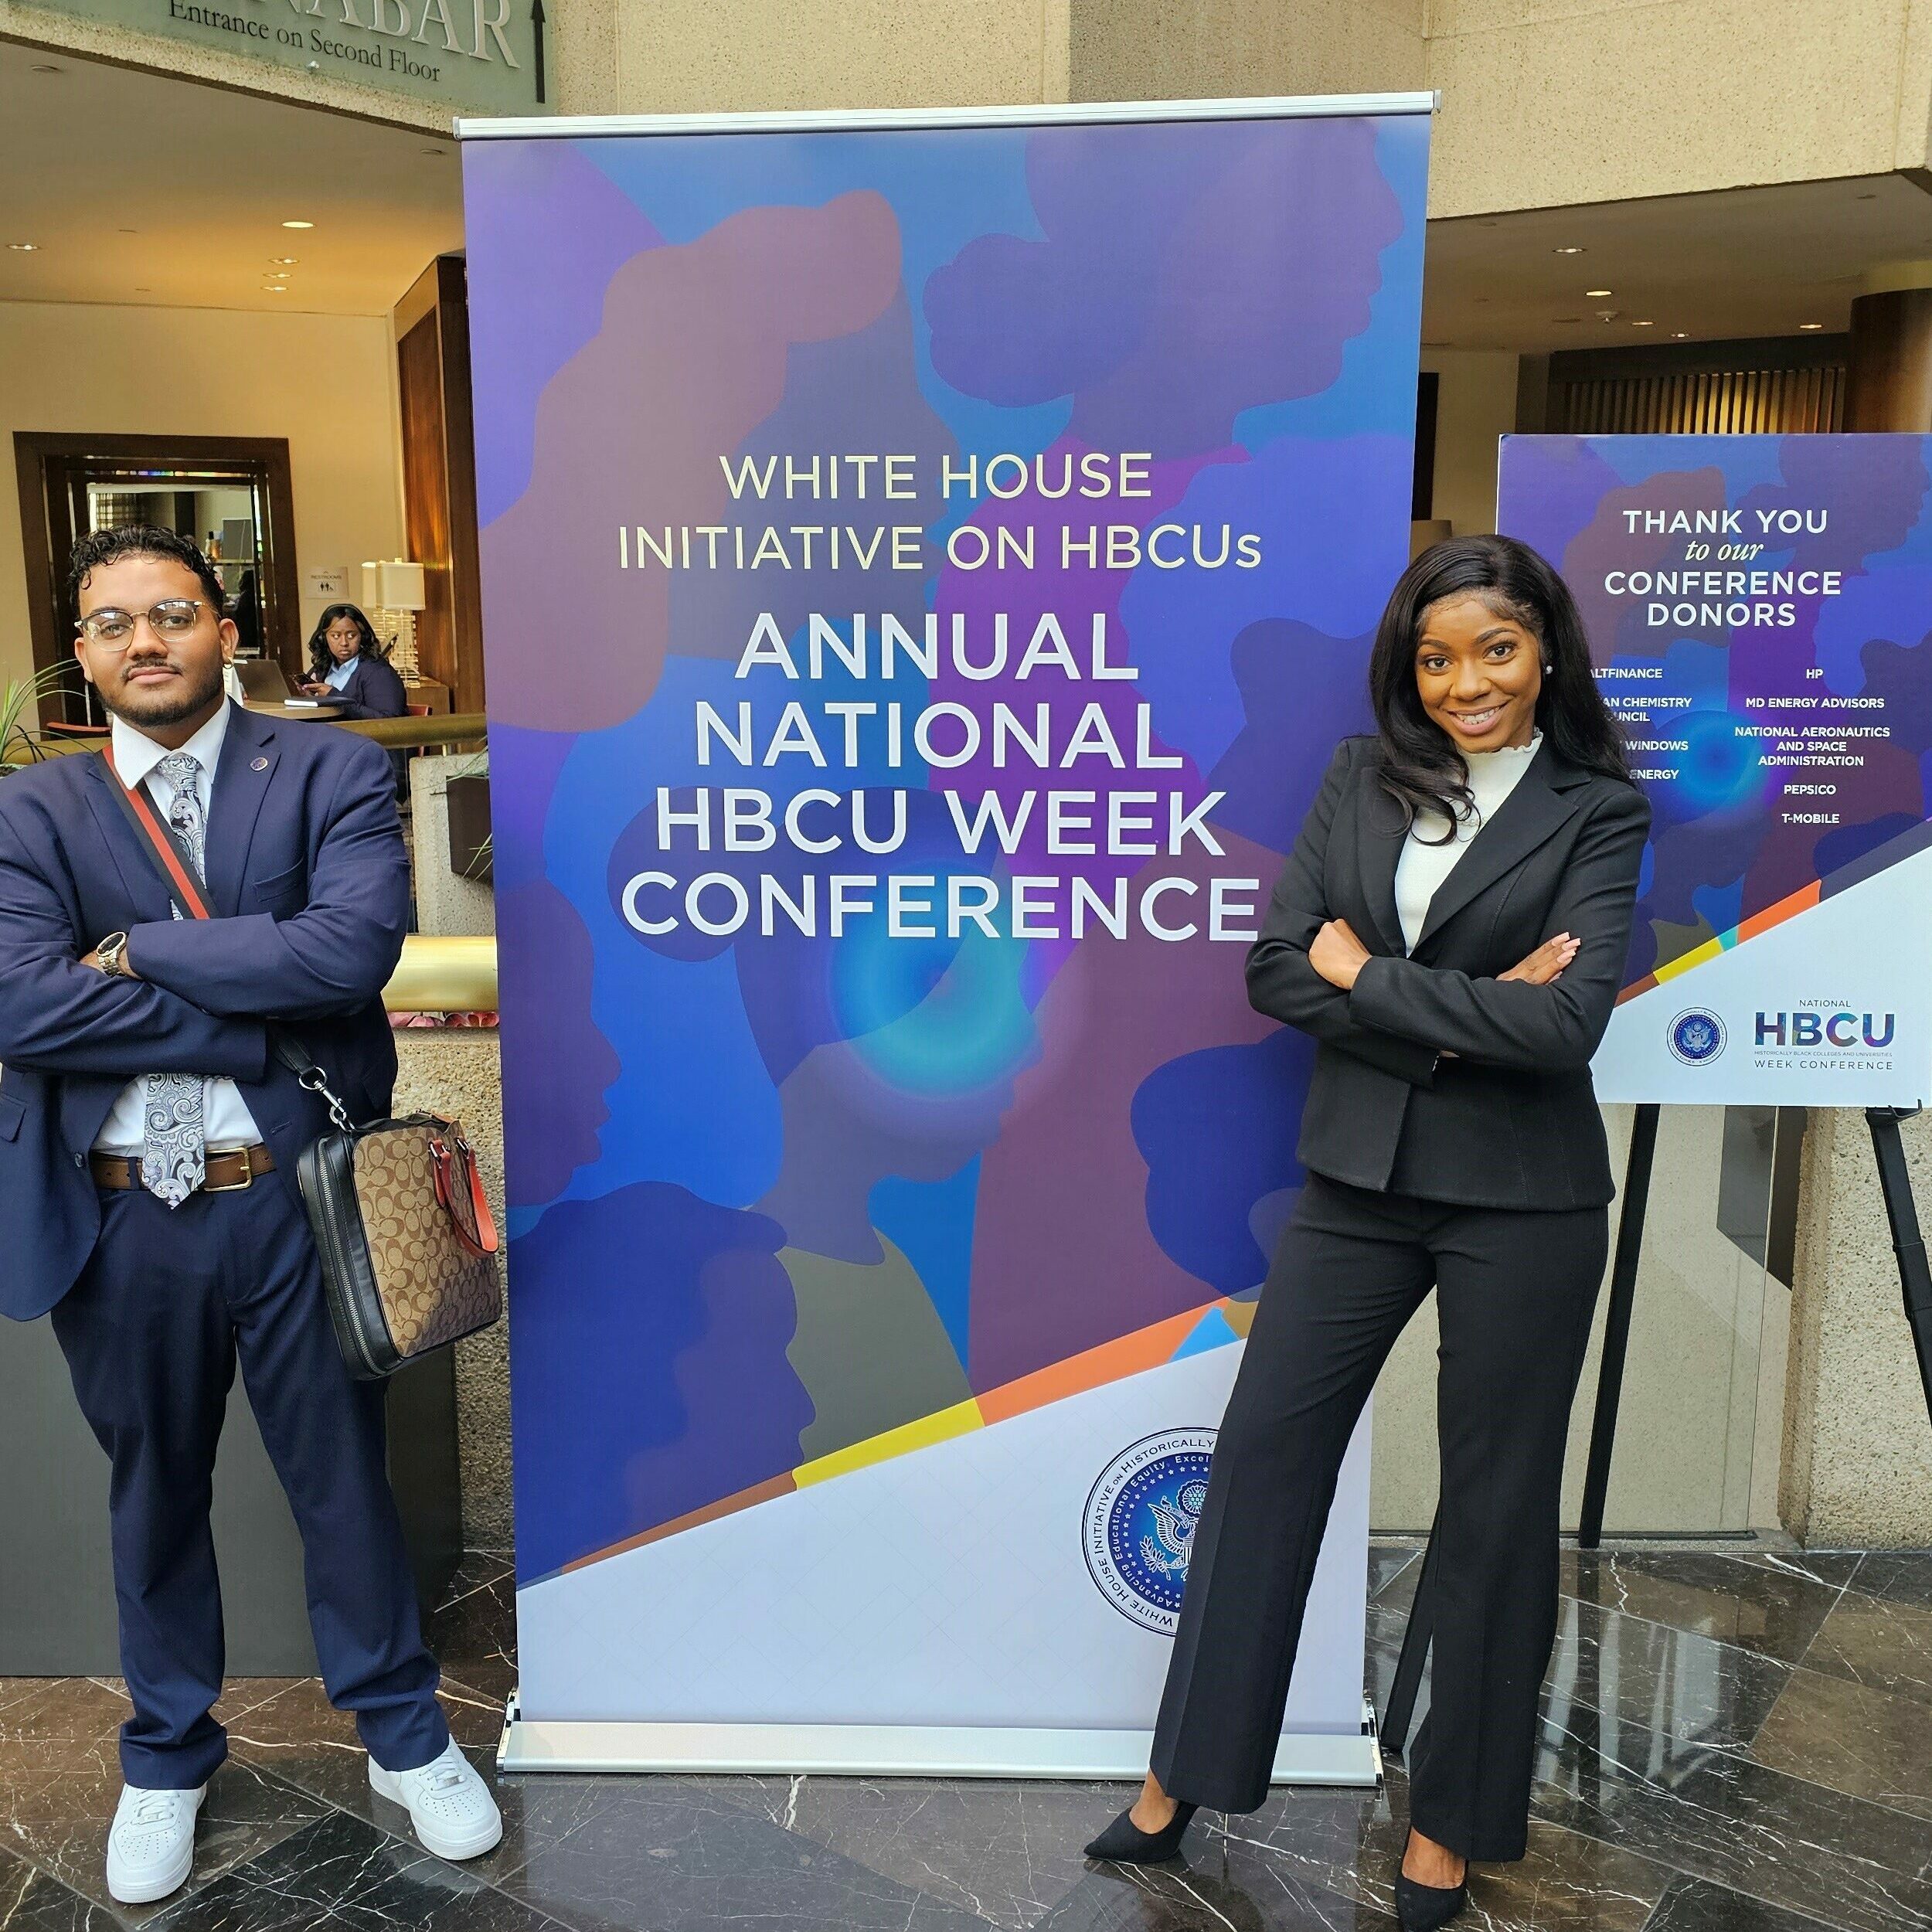 Michael Bell and Jackeima Flemming attend the National HBCU Week Conference.